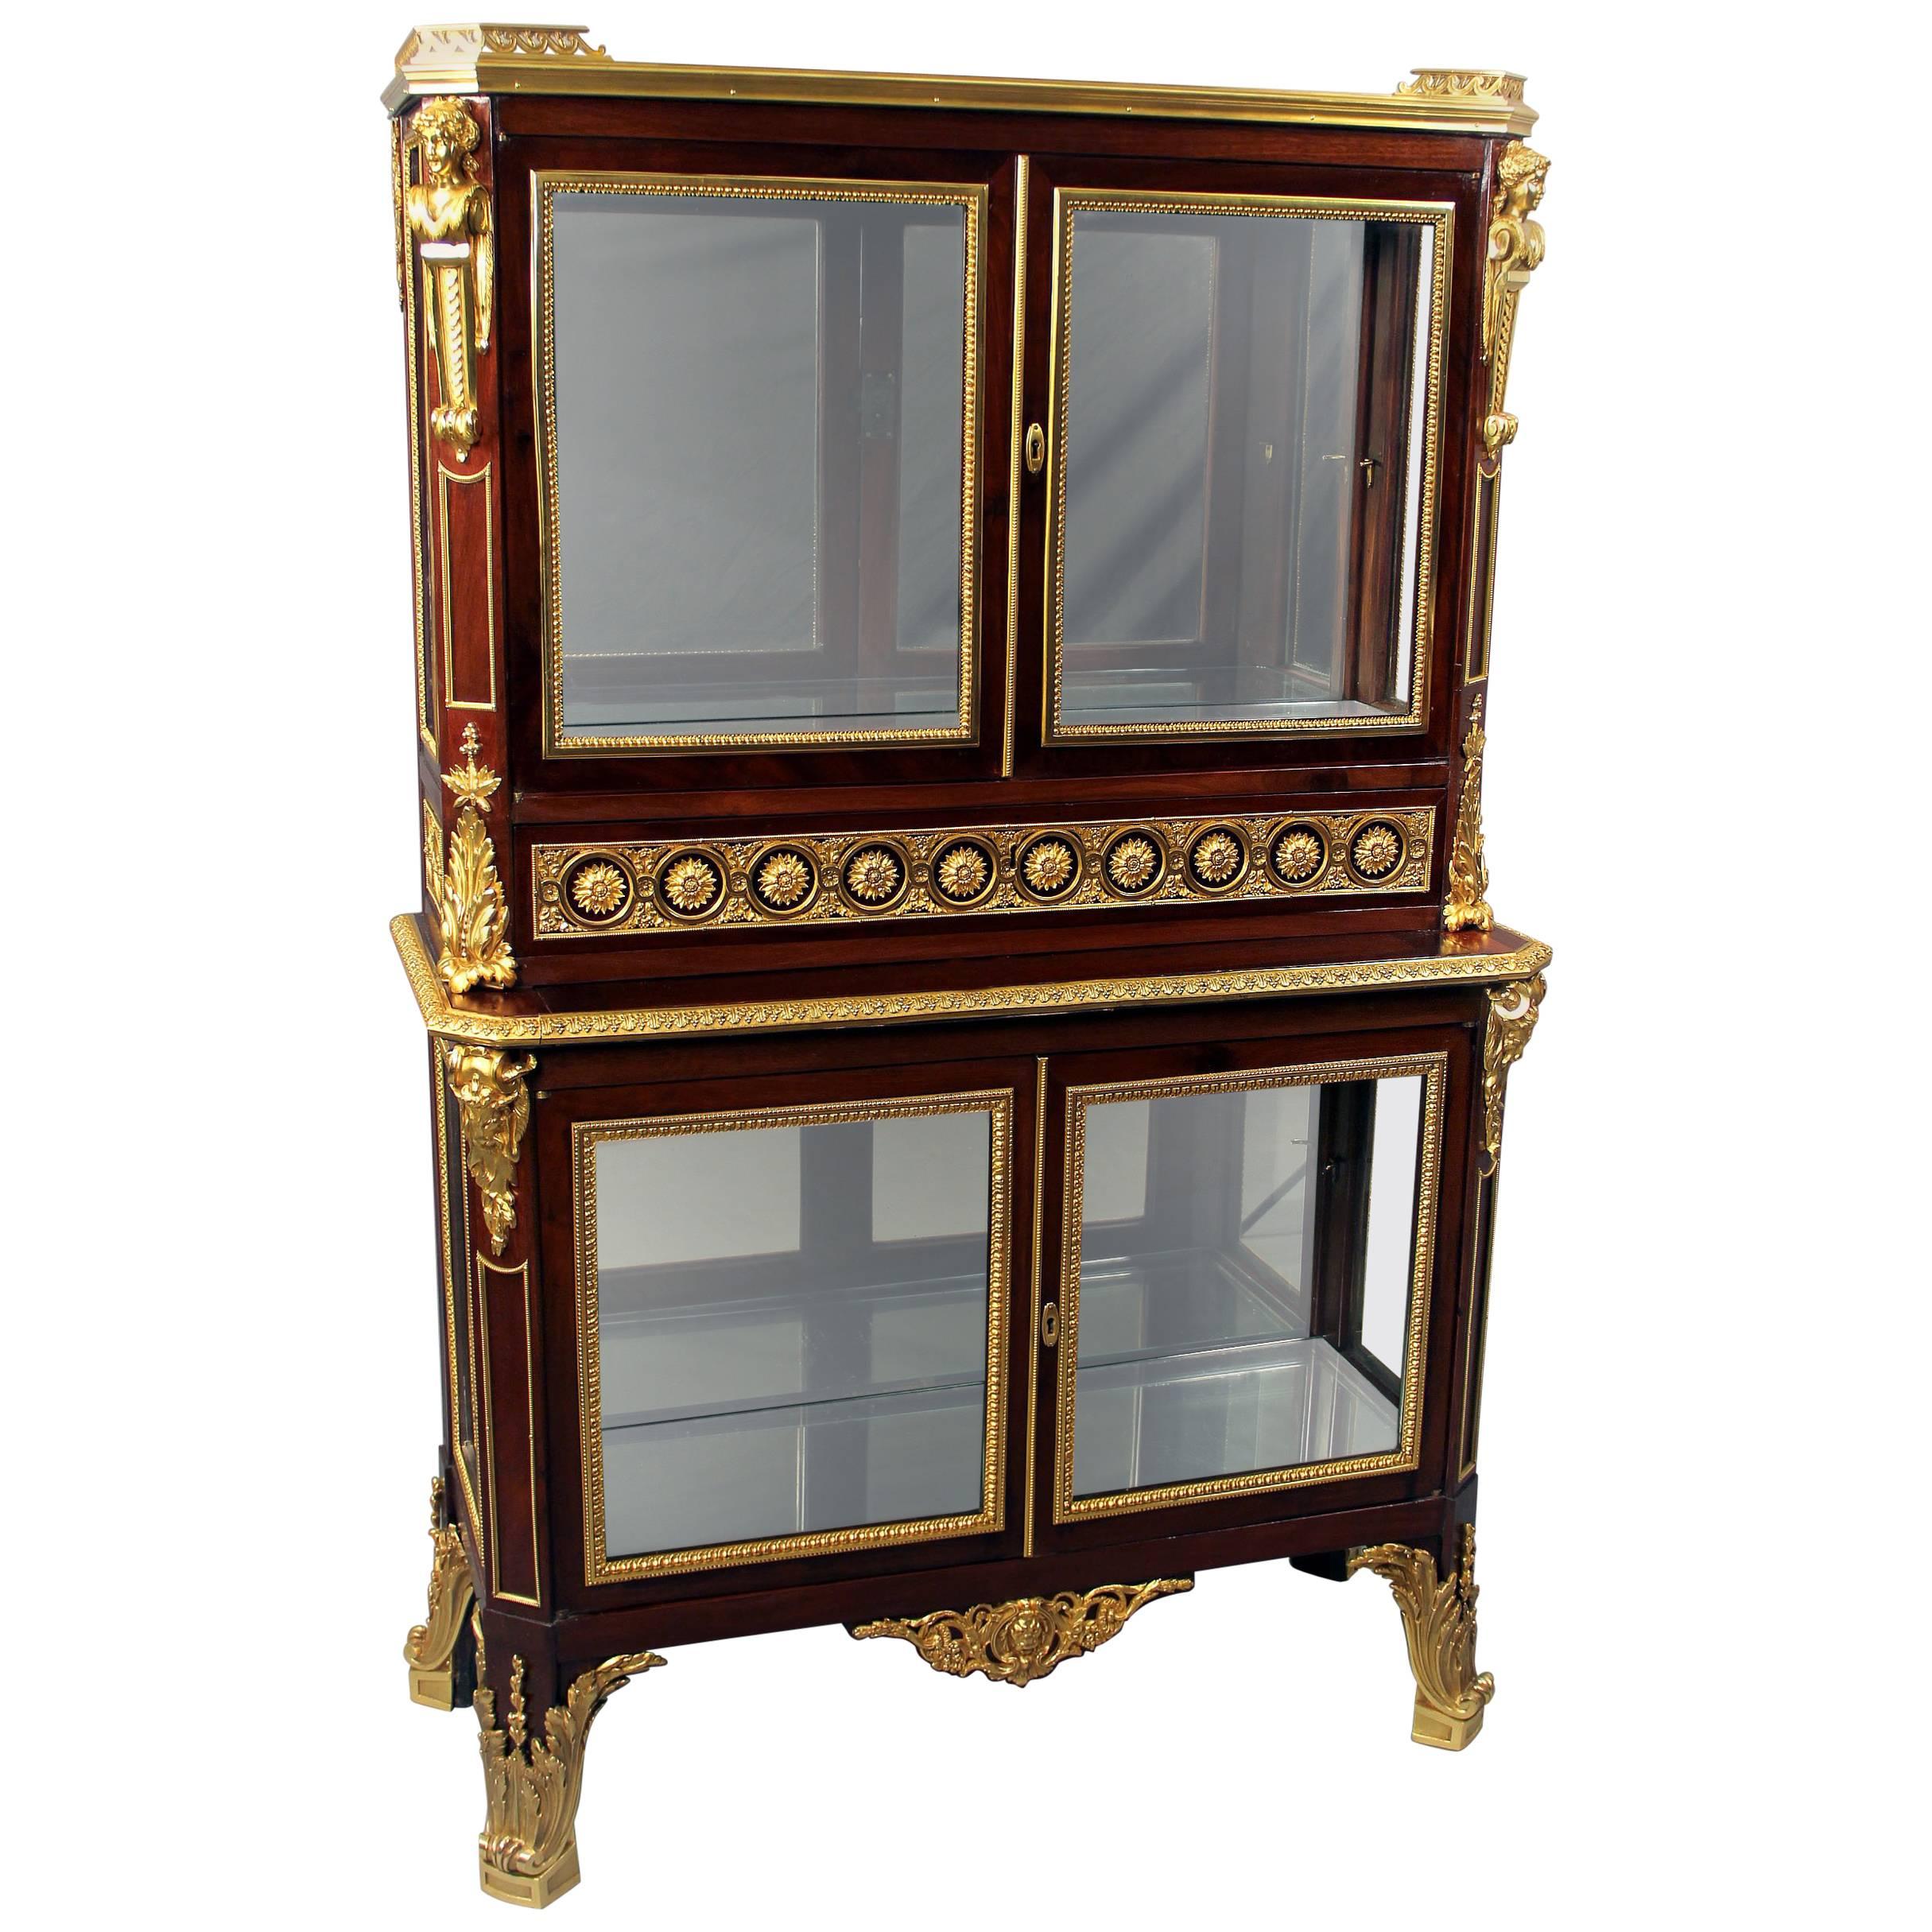 Fine Late 19th Century Gilt Bronze-Mounted Vitrine Cabinet by Henri Picard For Sale